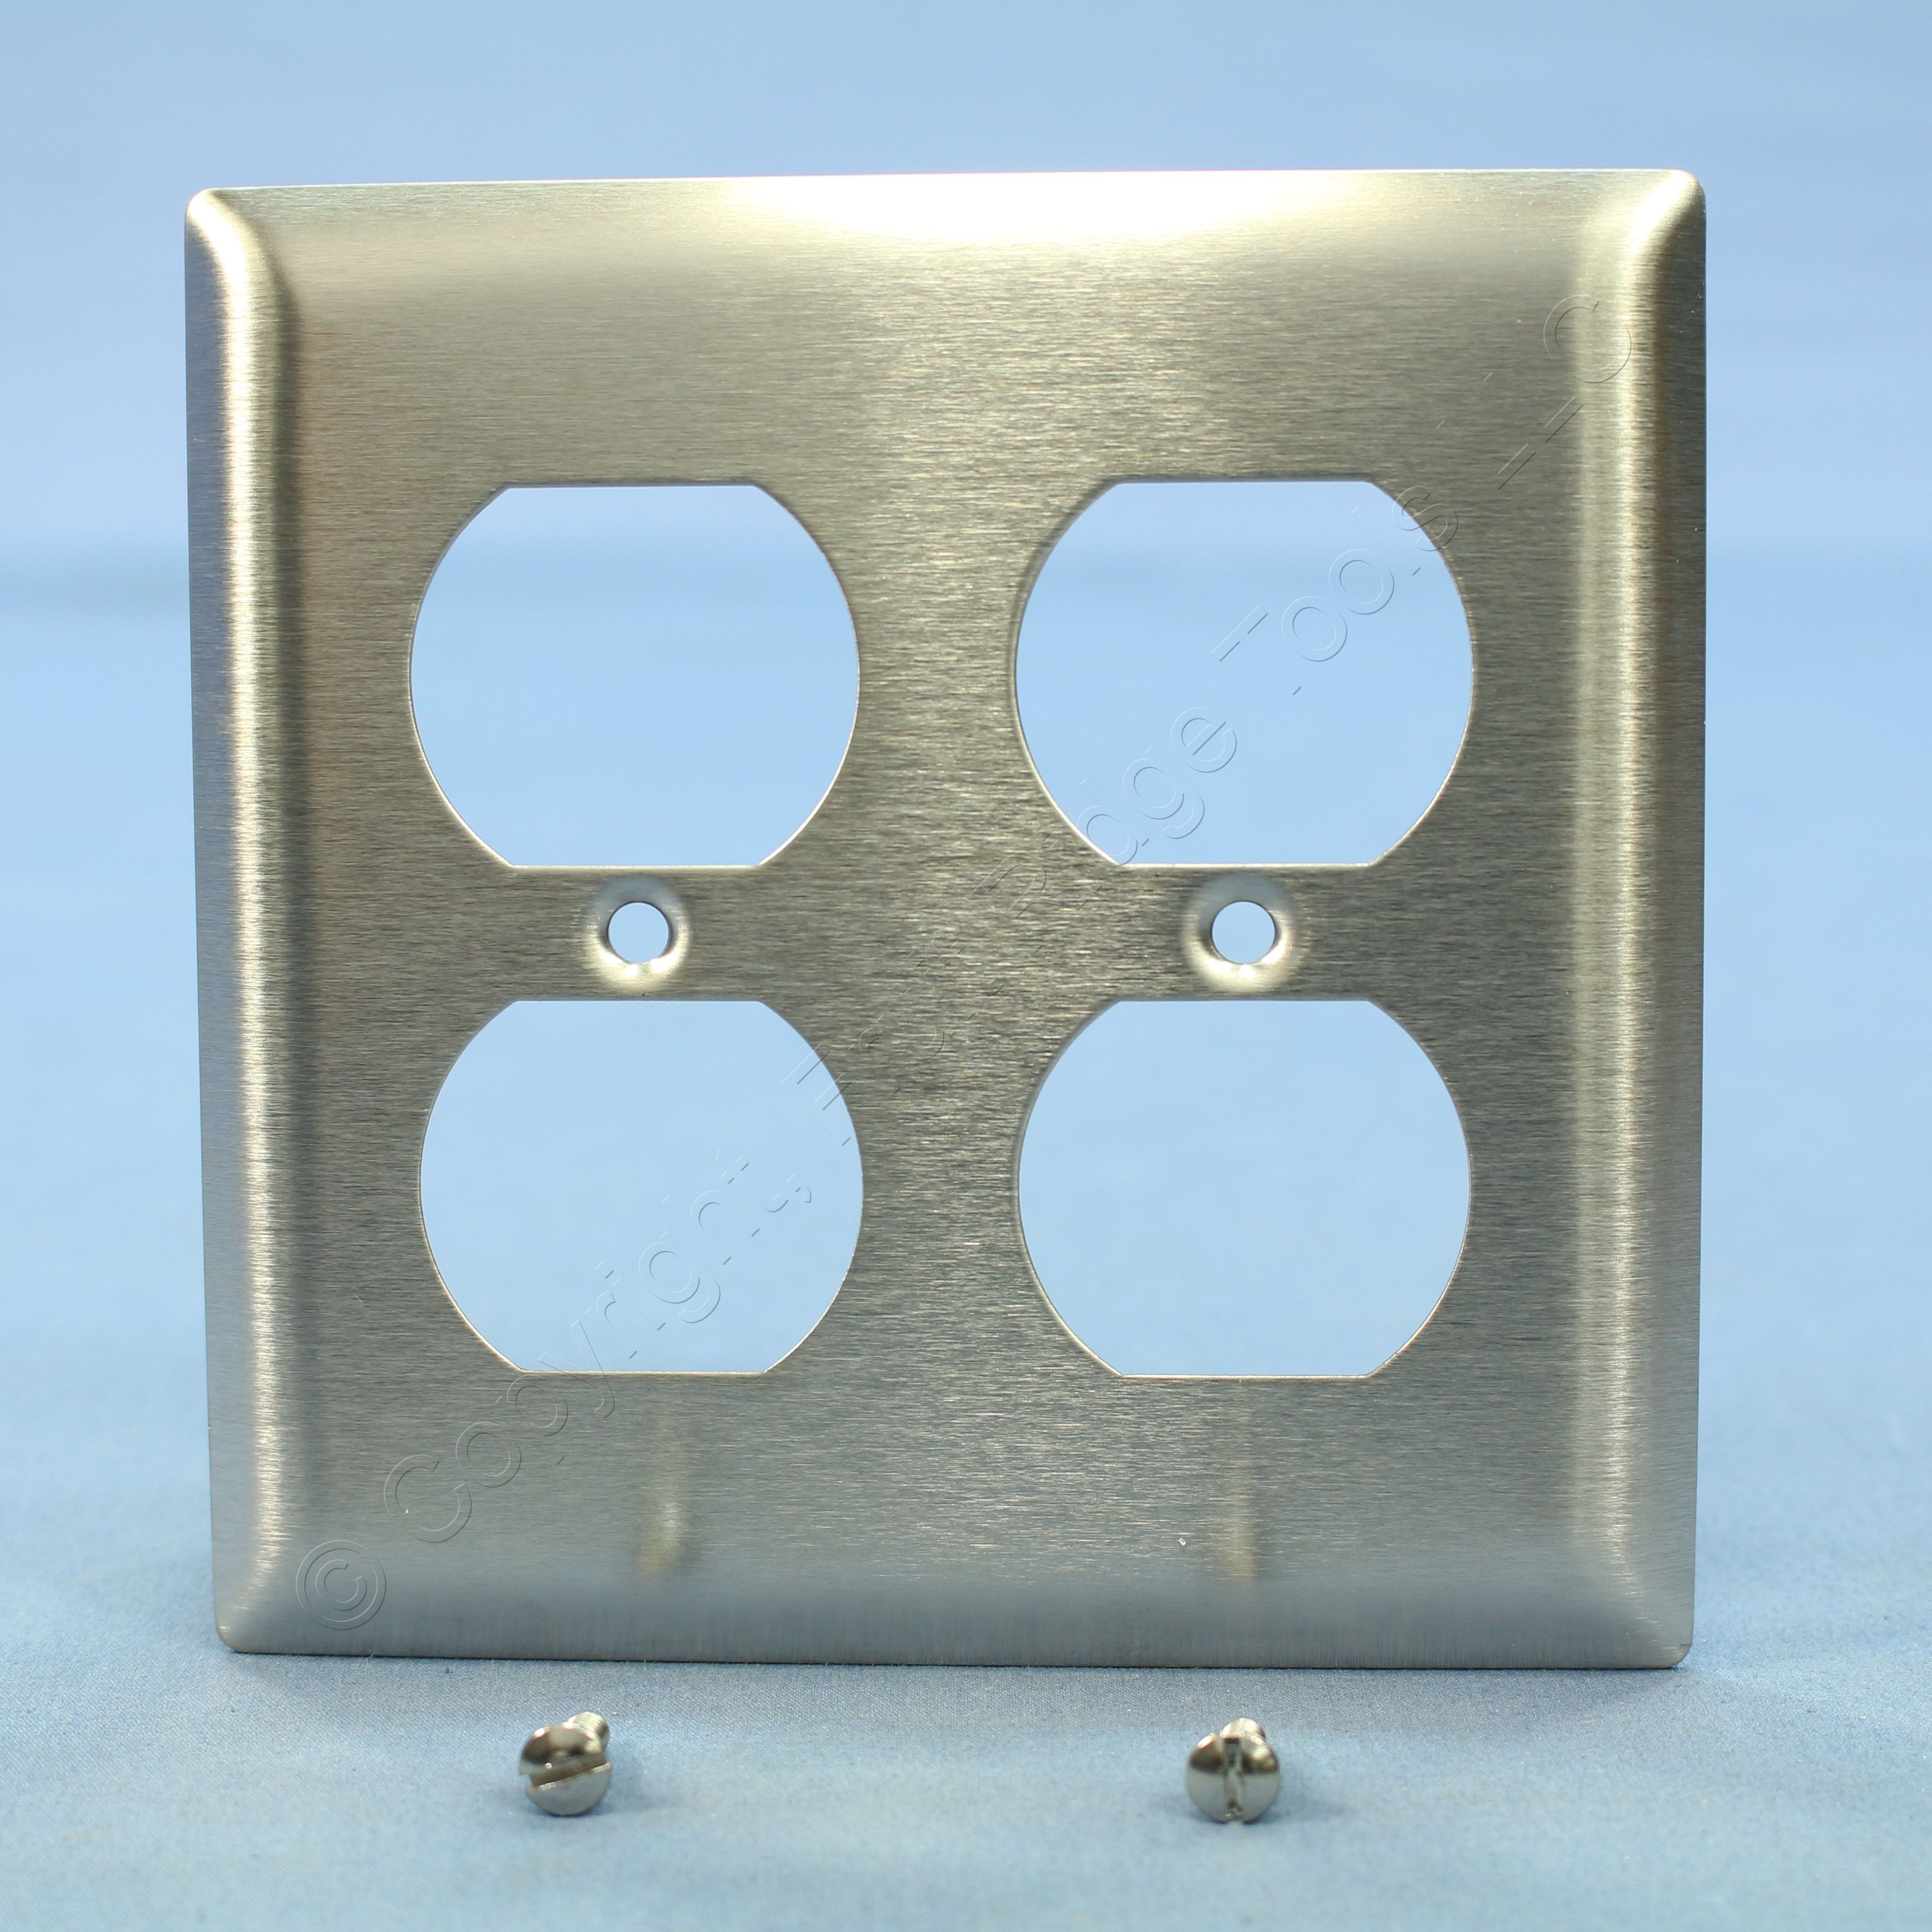 PS Type 302 Stainless Steel 2Gang Duplex Receptacle Wallplate Outlet Cover SS82 eBay